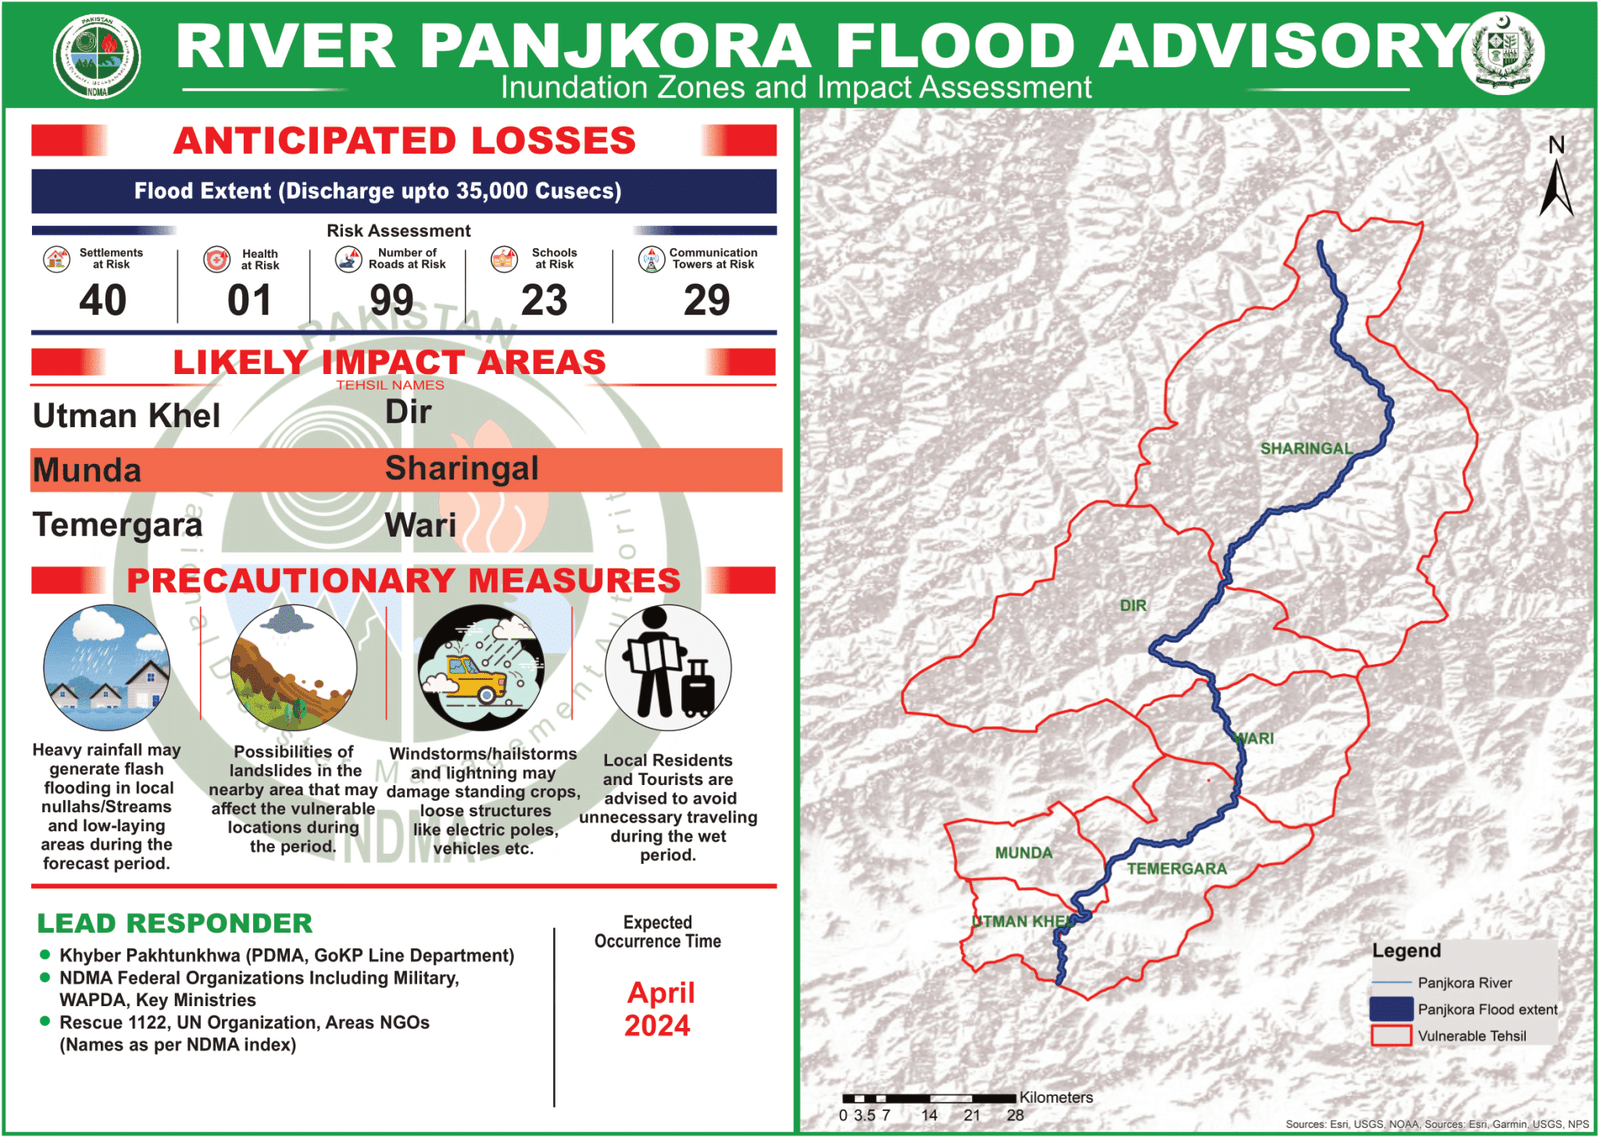 Flood Advisory Issued for River Panjkora Region as Water Levels Surge